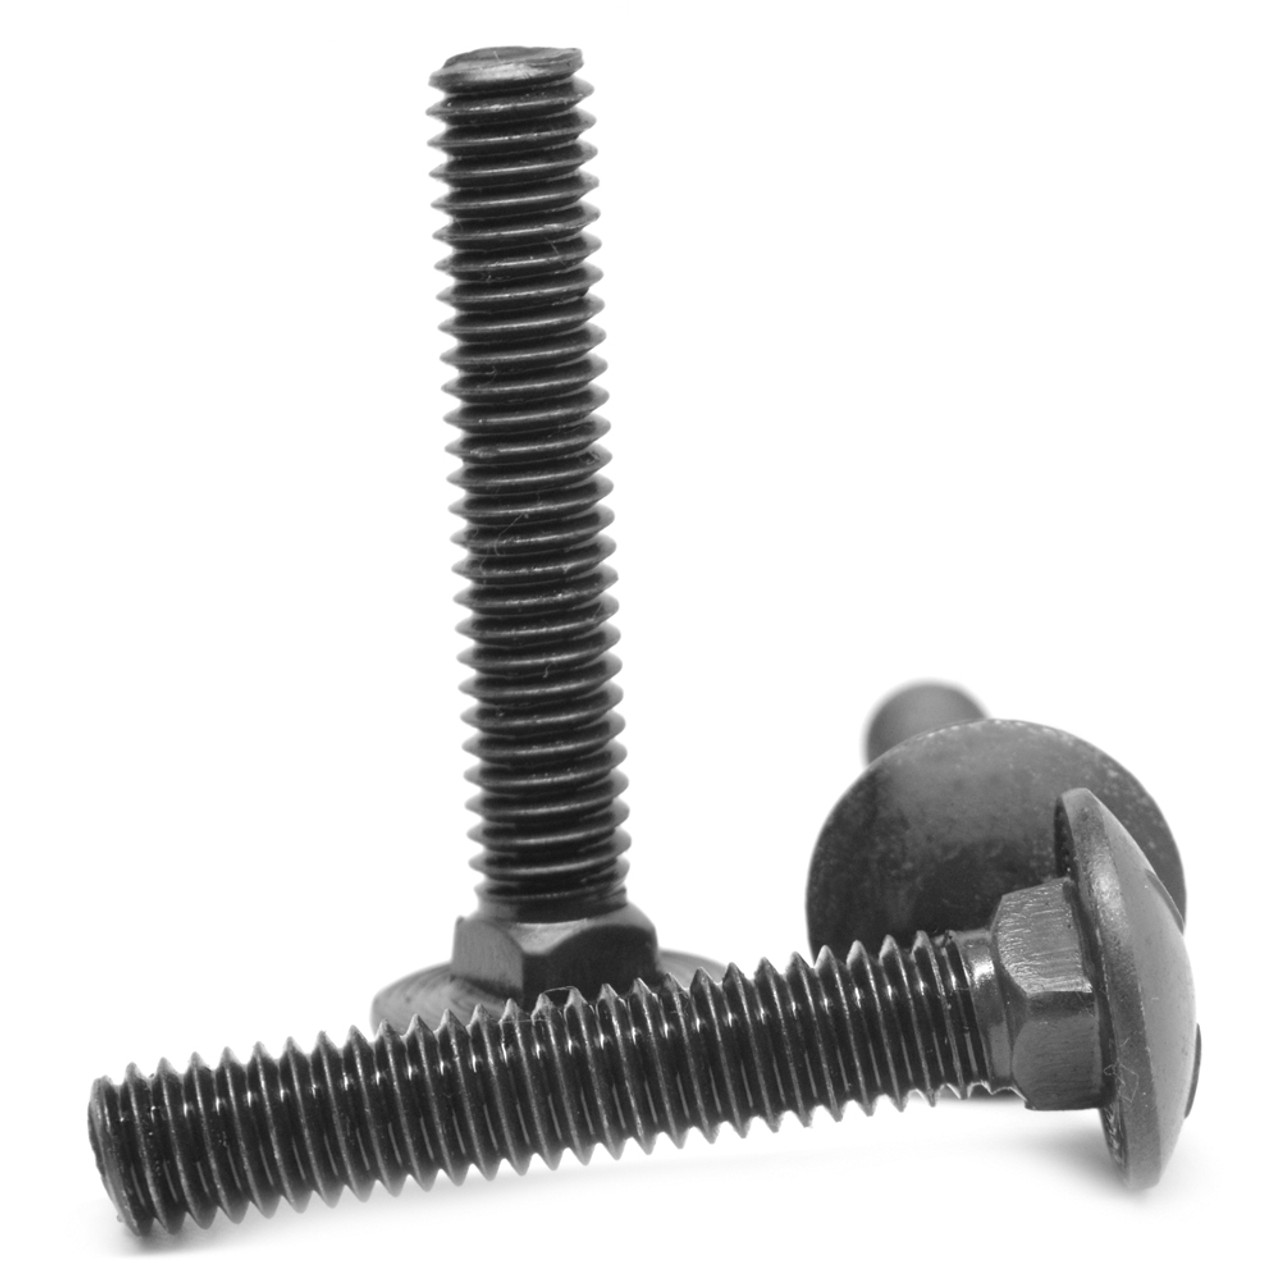 1/4-20 x 2 Coarse Thread Carriage Bolt Low Carbon Steel Black Oxide